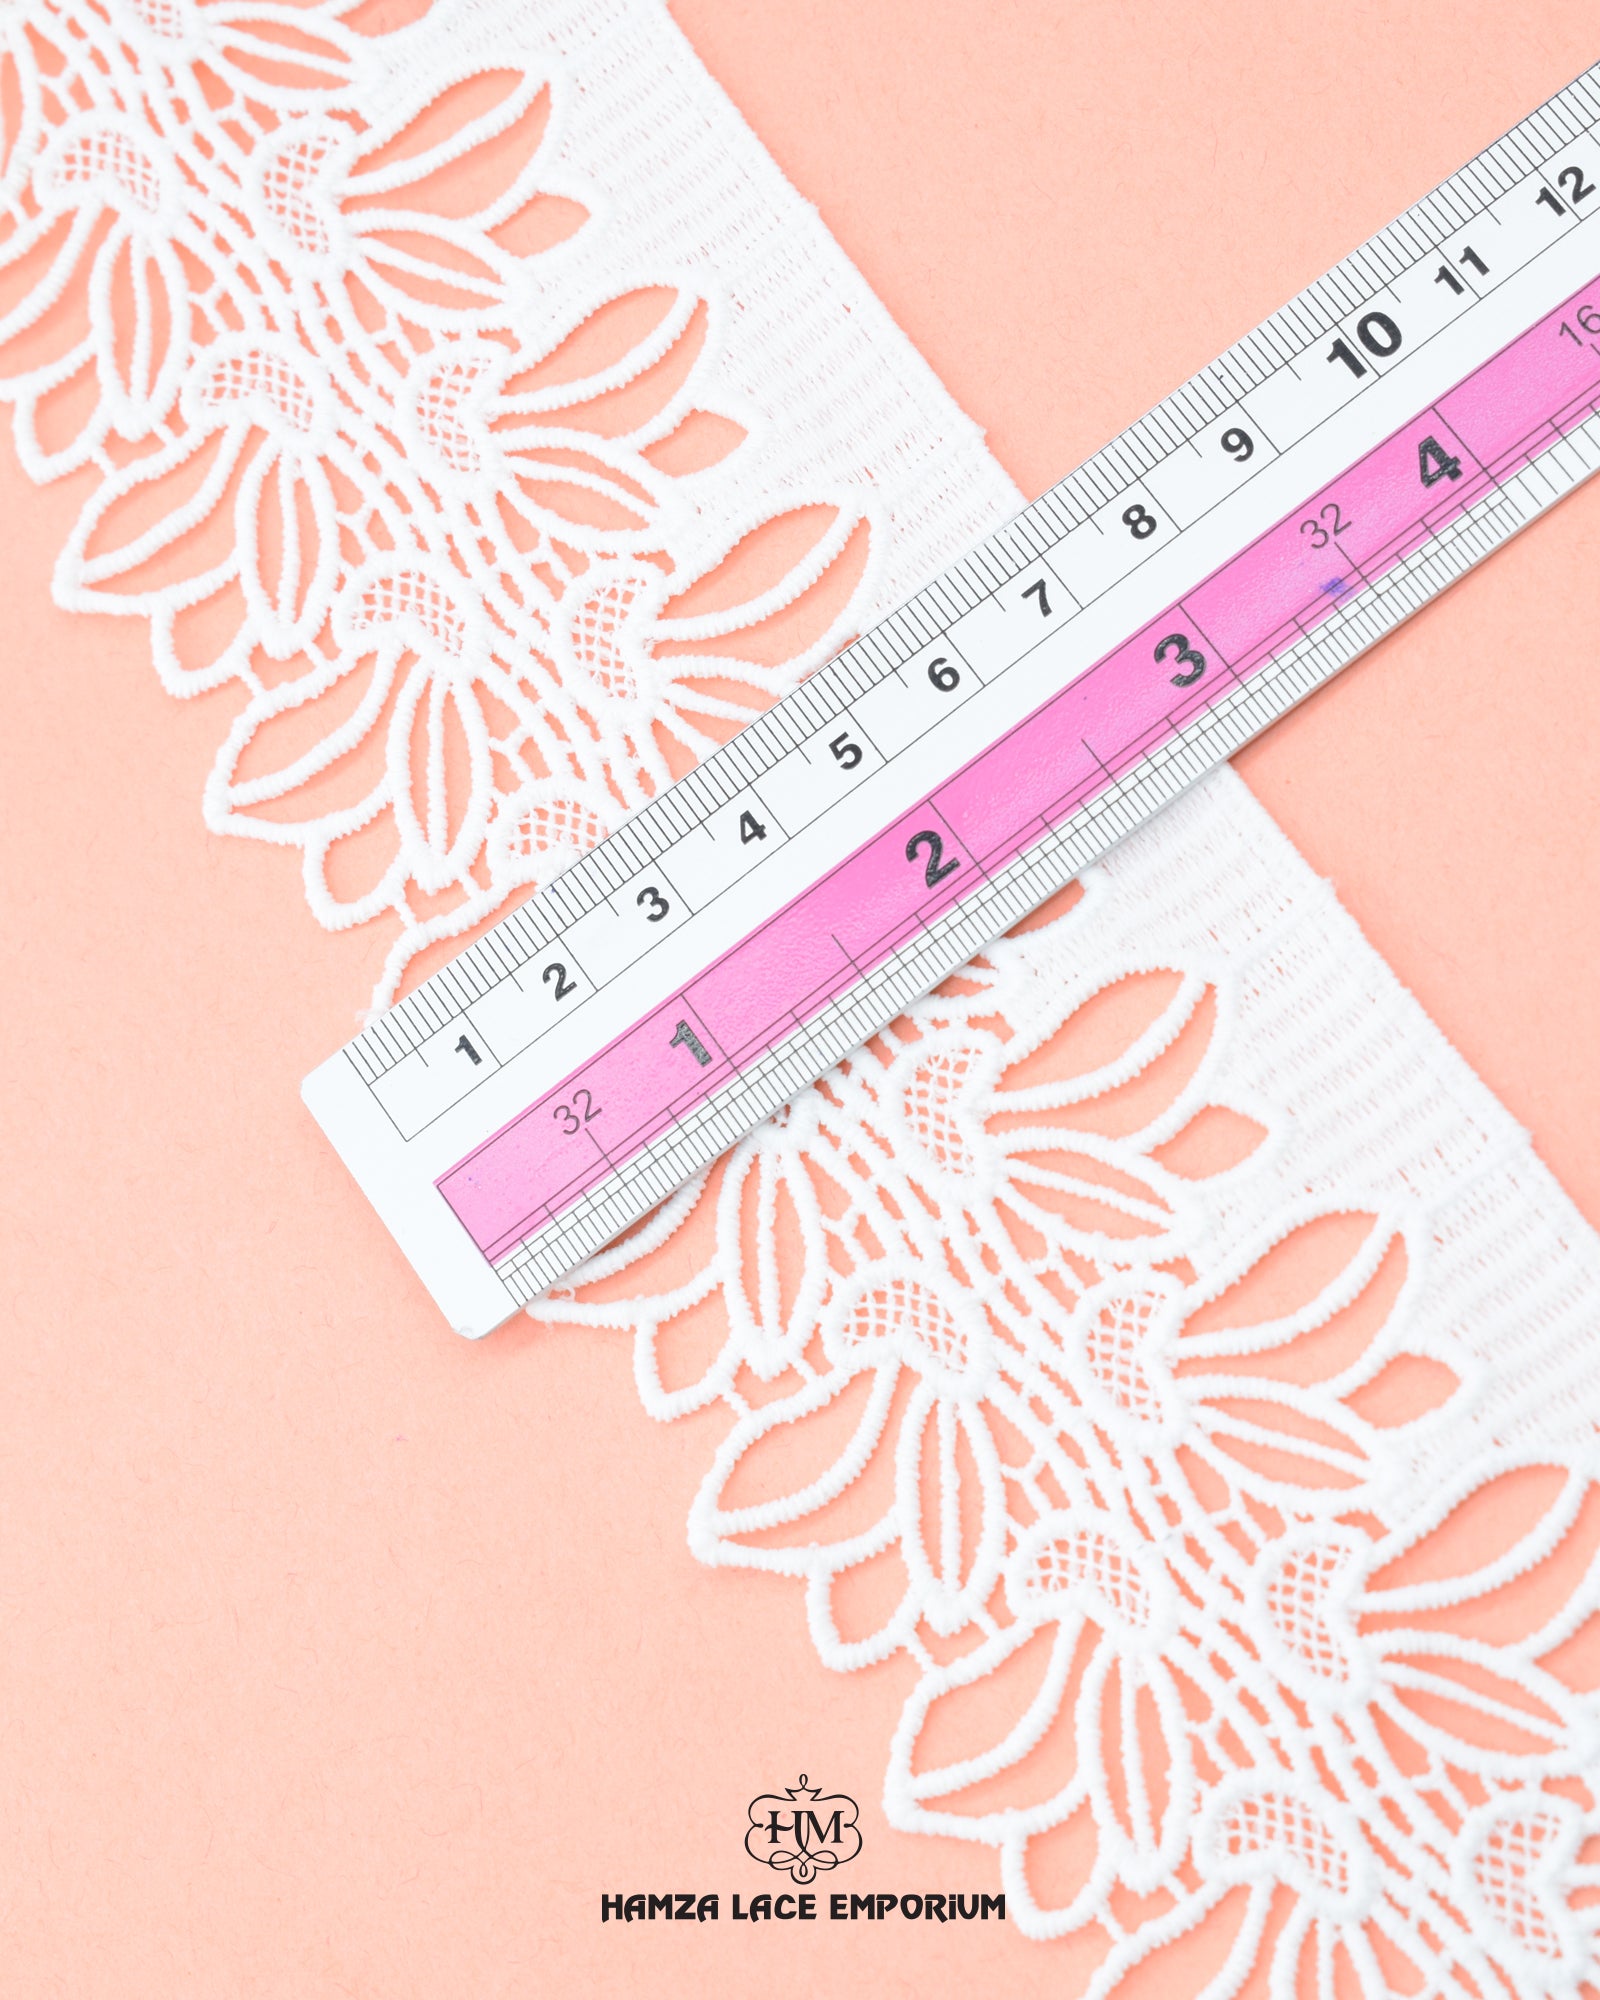 A scale is on the 'Edging Flower Lace 2505' measuring its size as 3 inches with the brand logo at the bottom